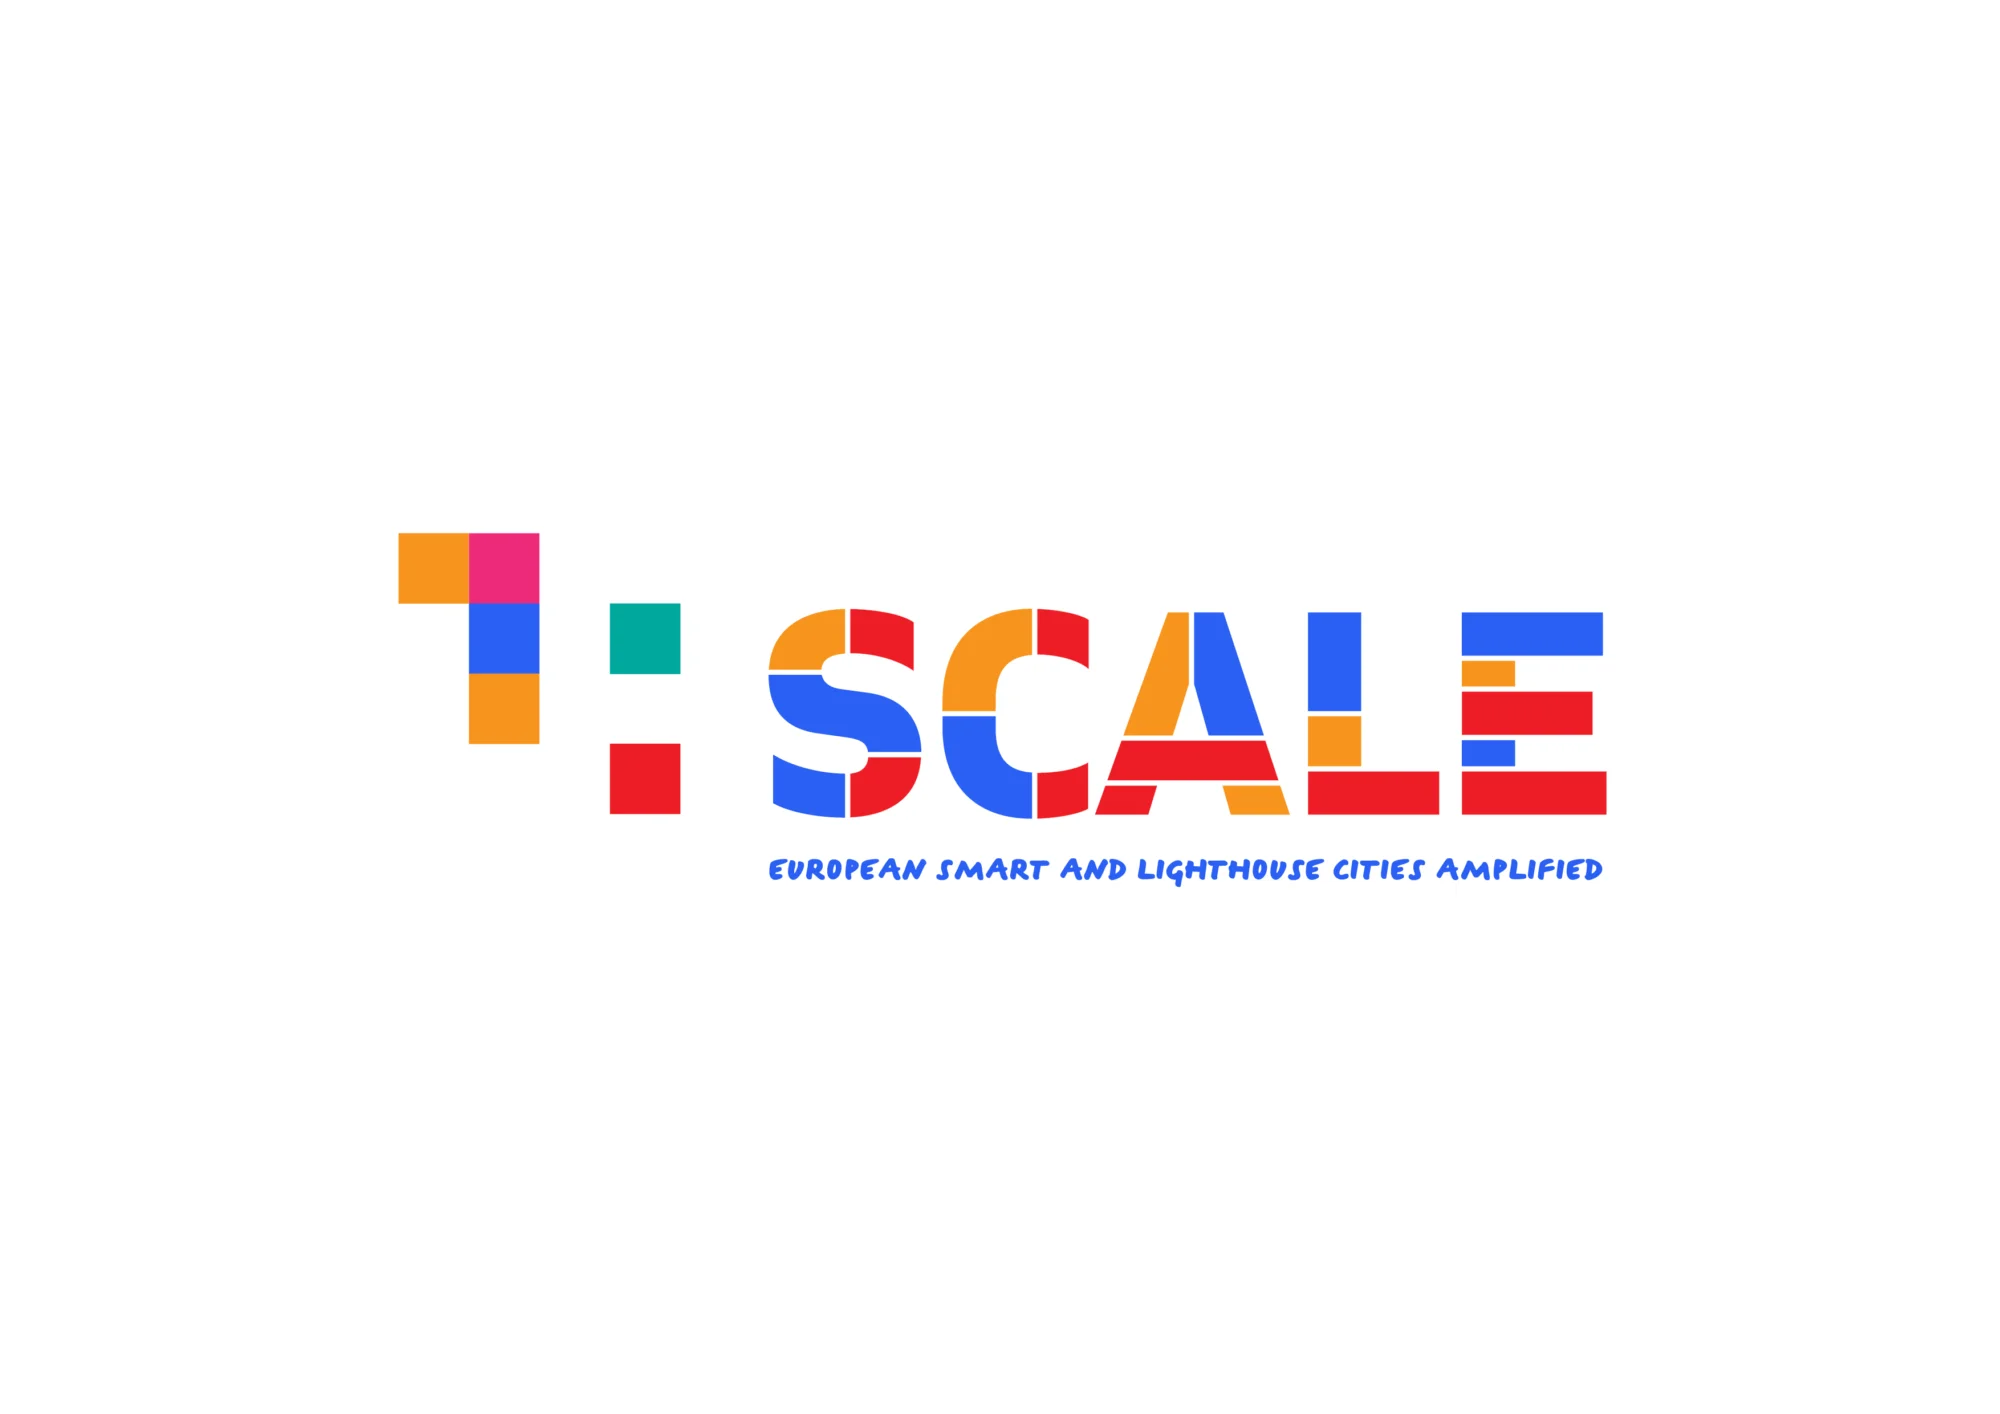 SCALE is calling for Smart City Experts